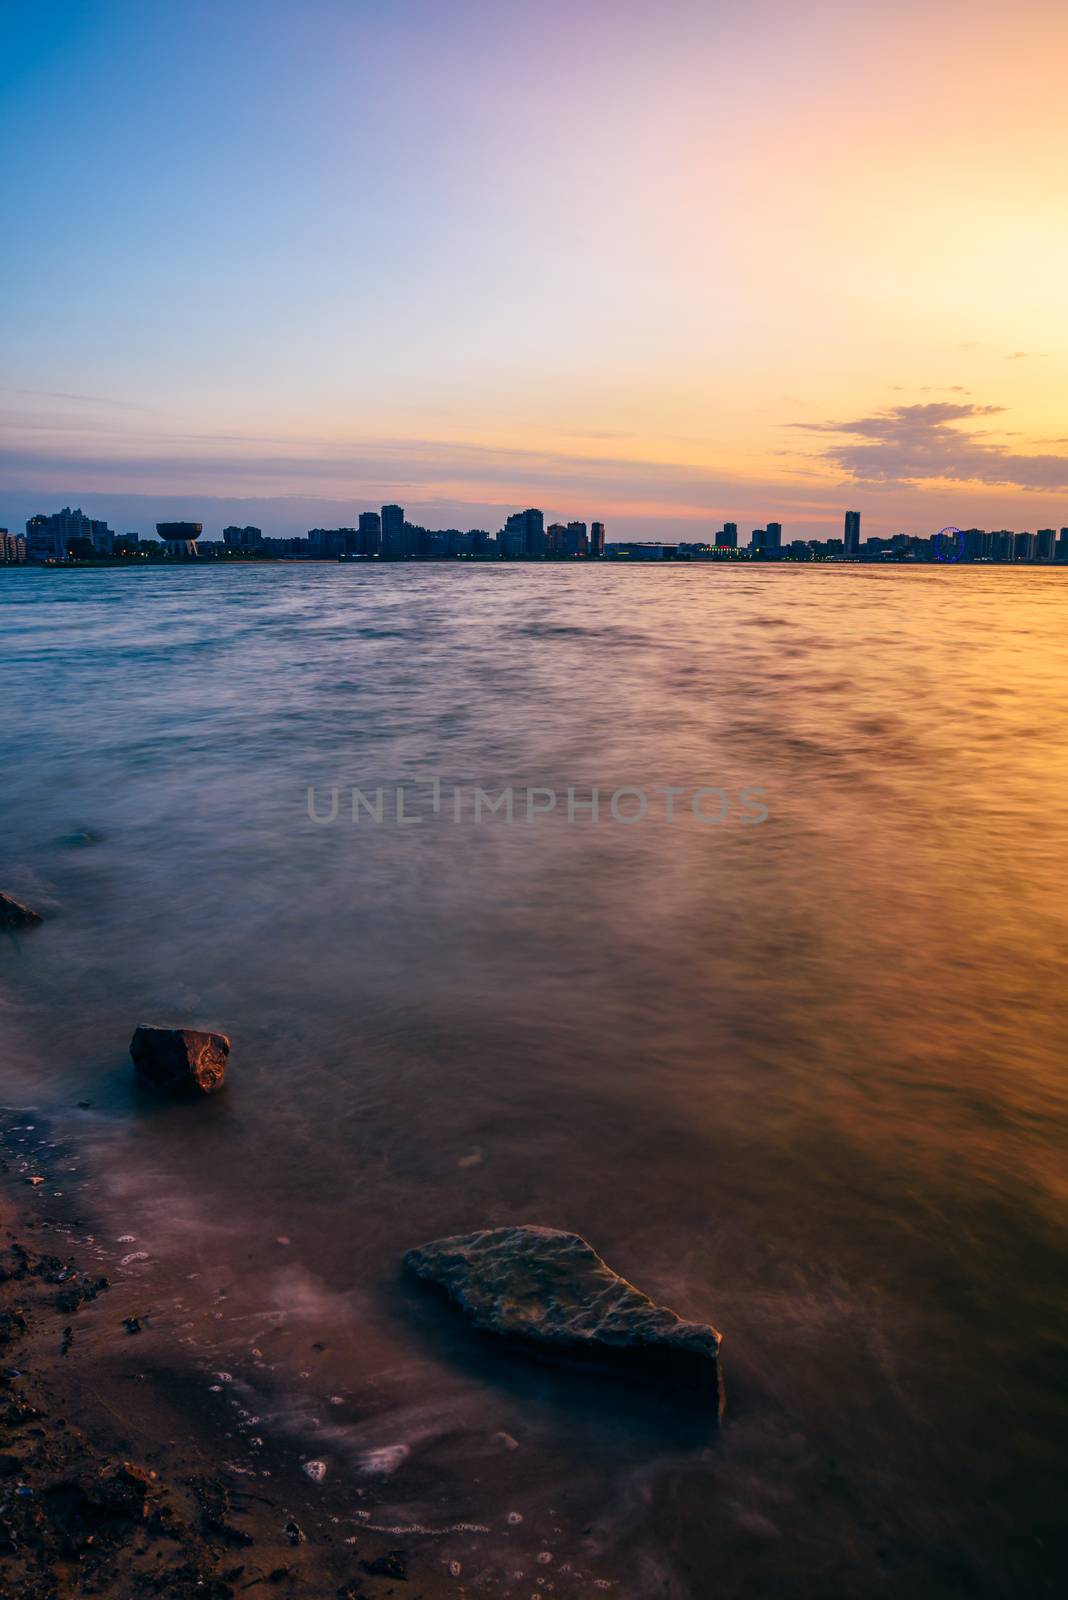 Sunrise view of city with stones in water on foreground